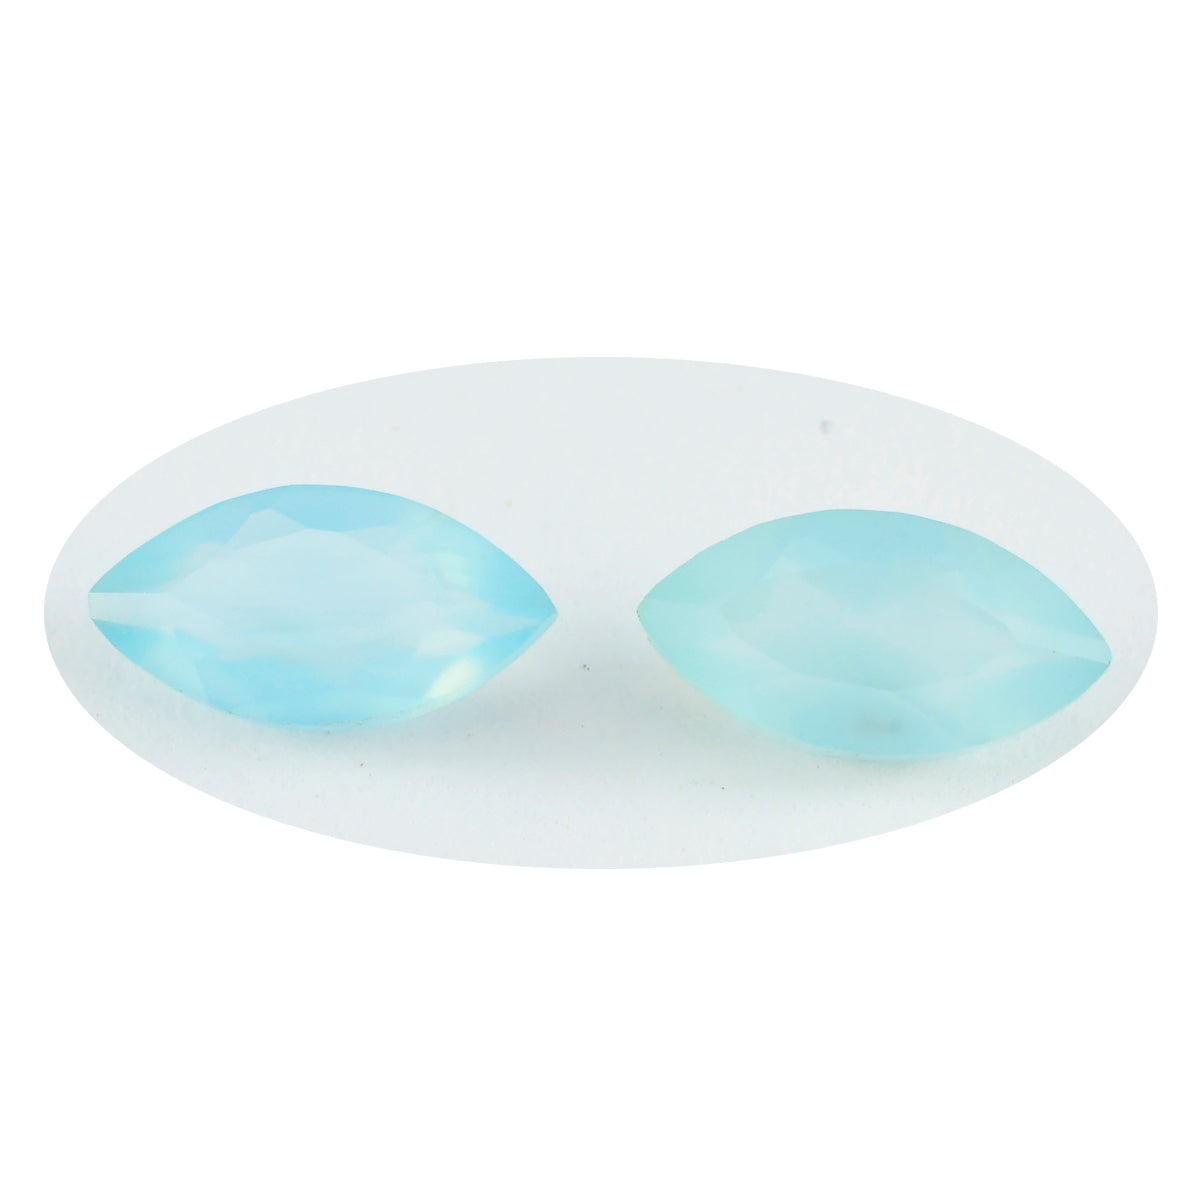 Riyogems 1PC Natural Aqua Chalcedony Faceted 10x20 mm Marquise Shape Nice Quality Loose Gem